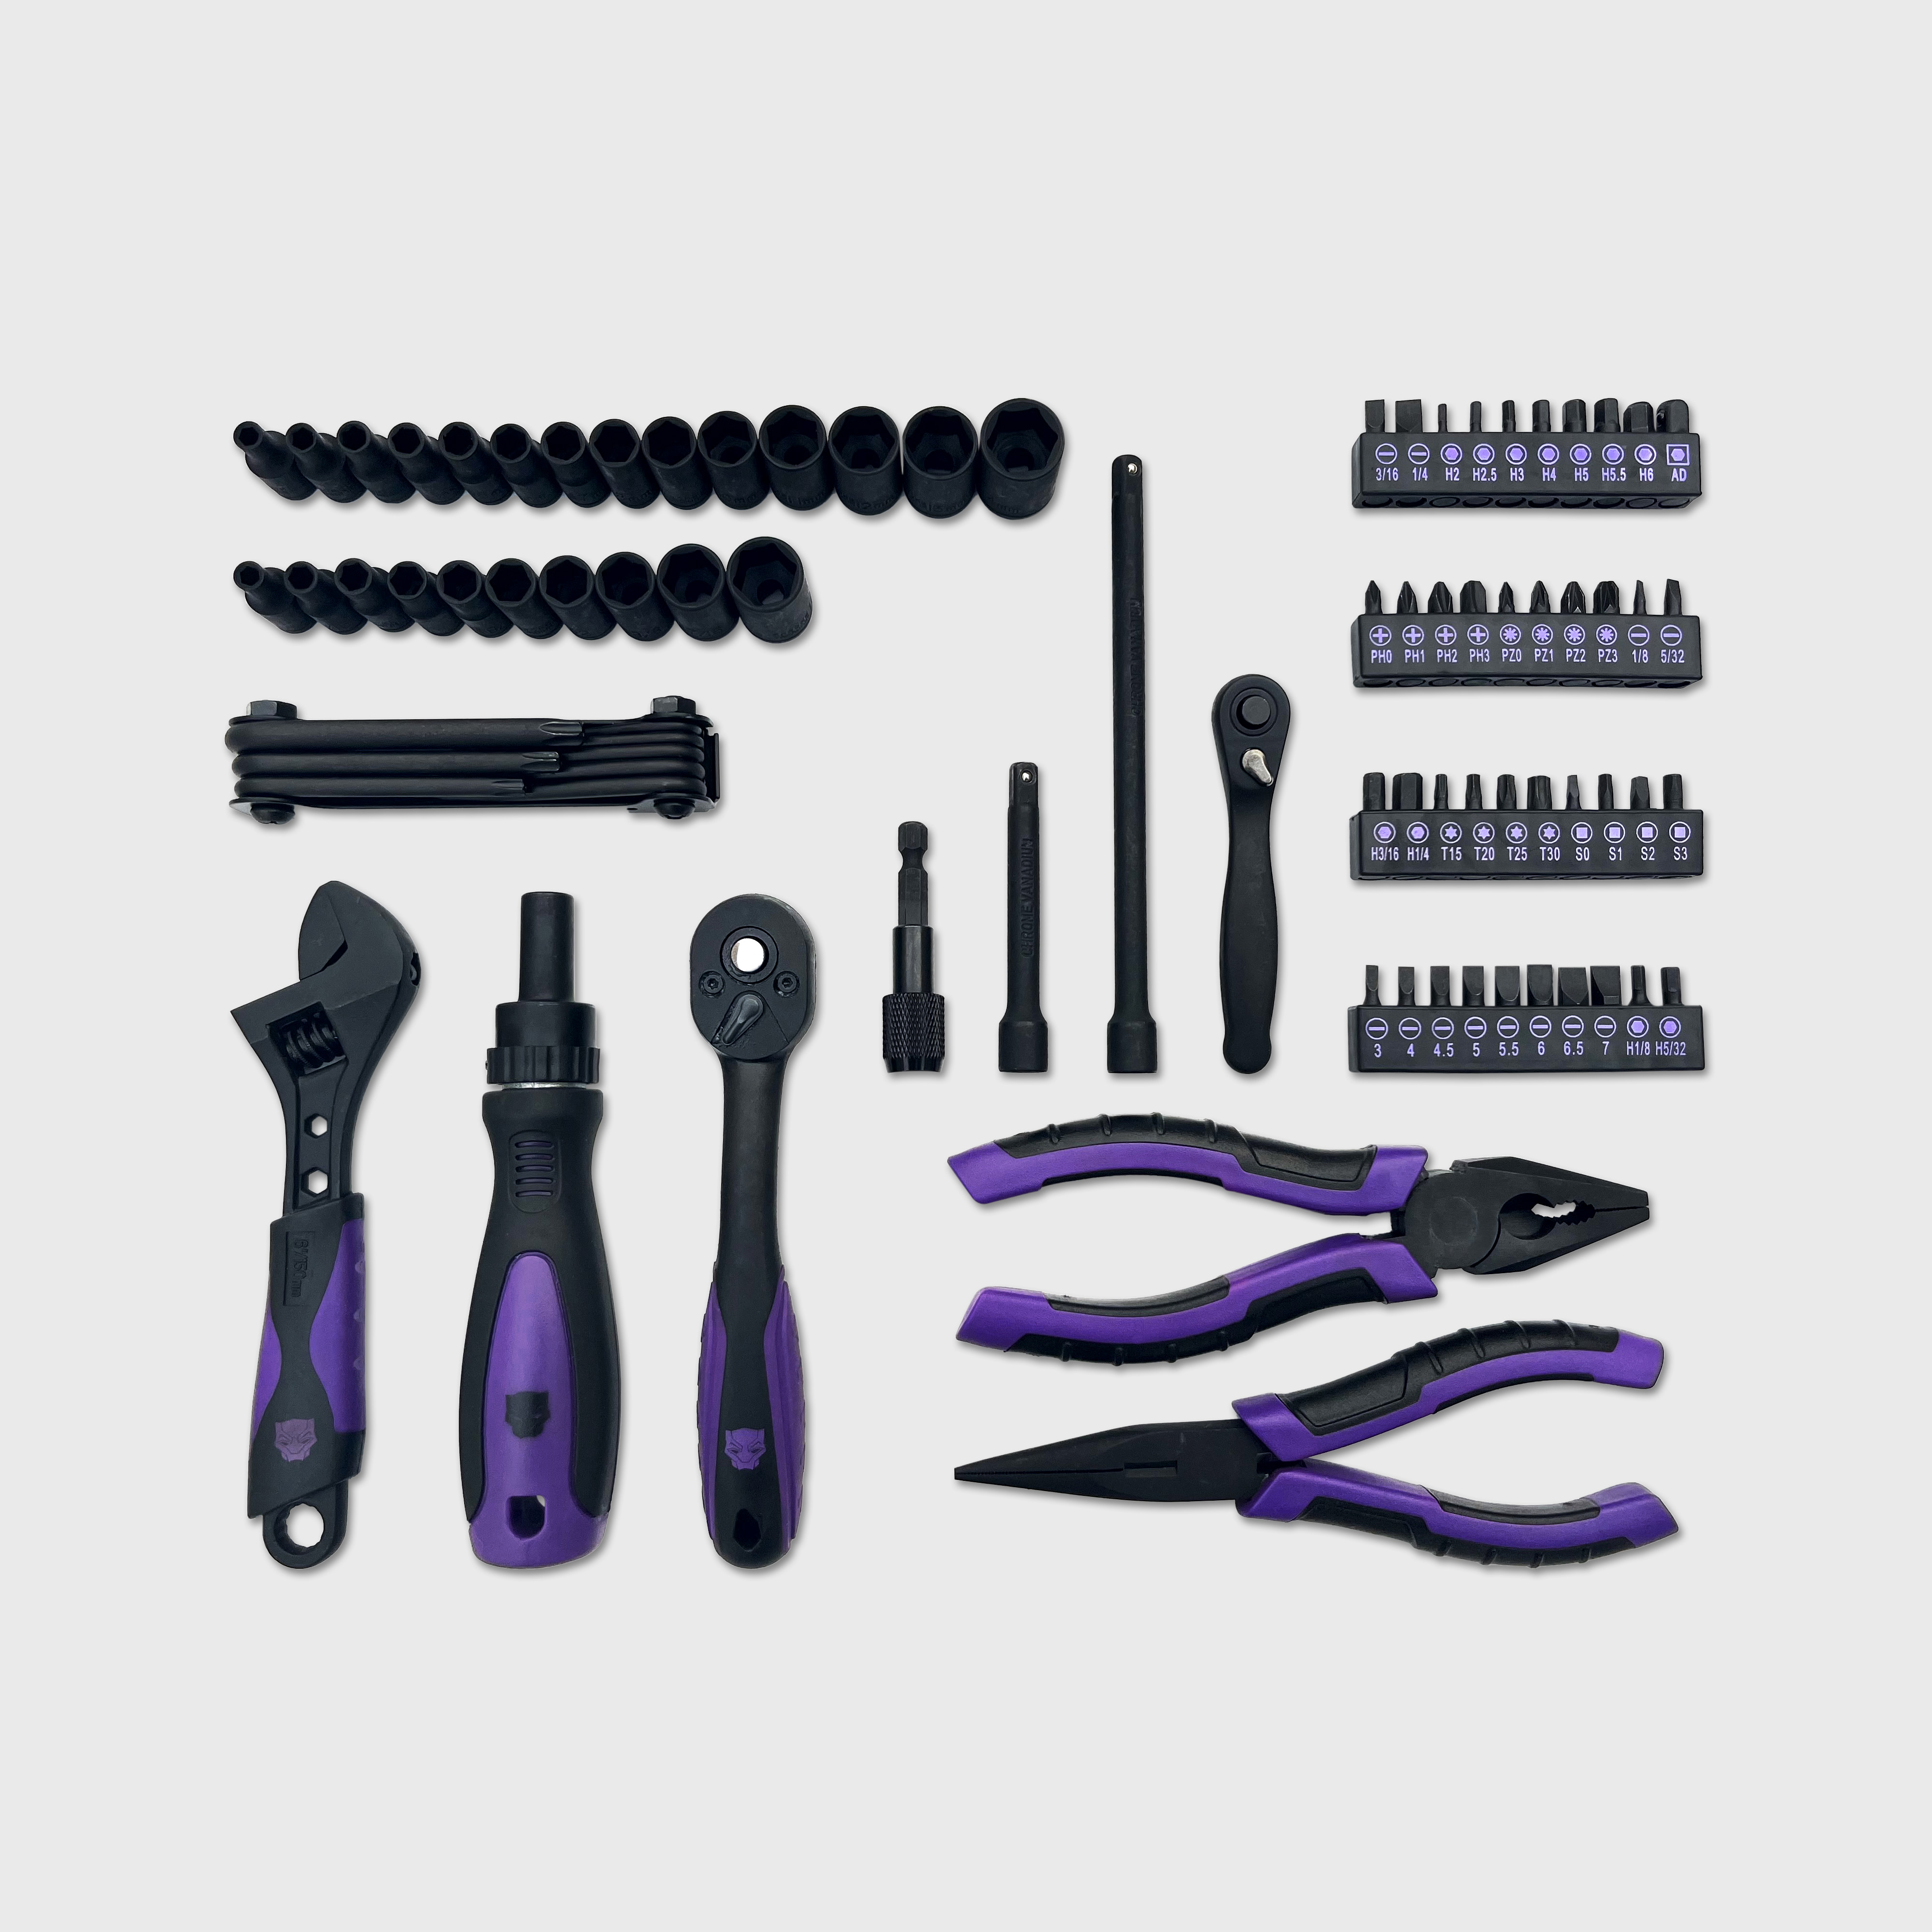 Marvel Black Panther 82pc Giftable Tool Set with Socket Set and Hand Tools.  Purple Edition